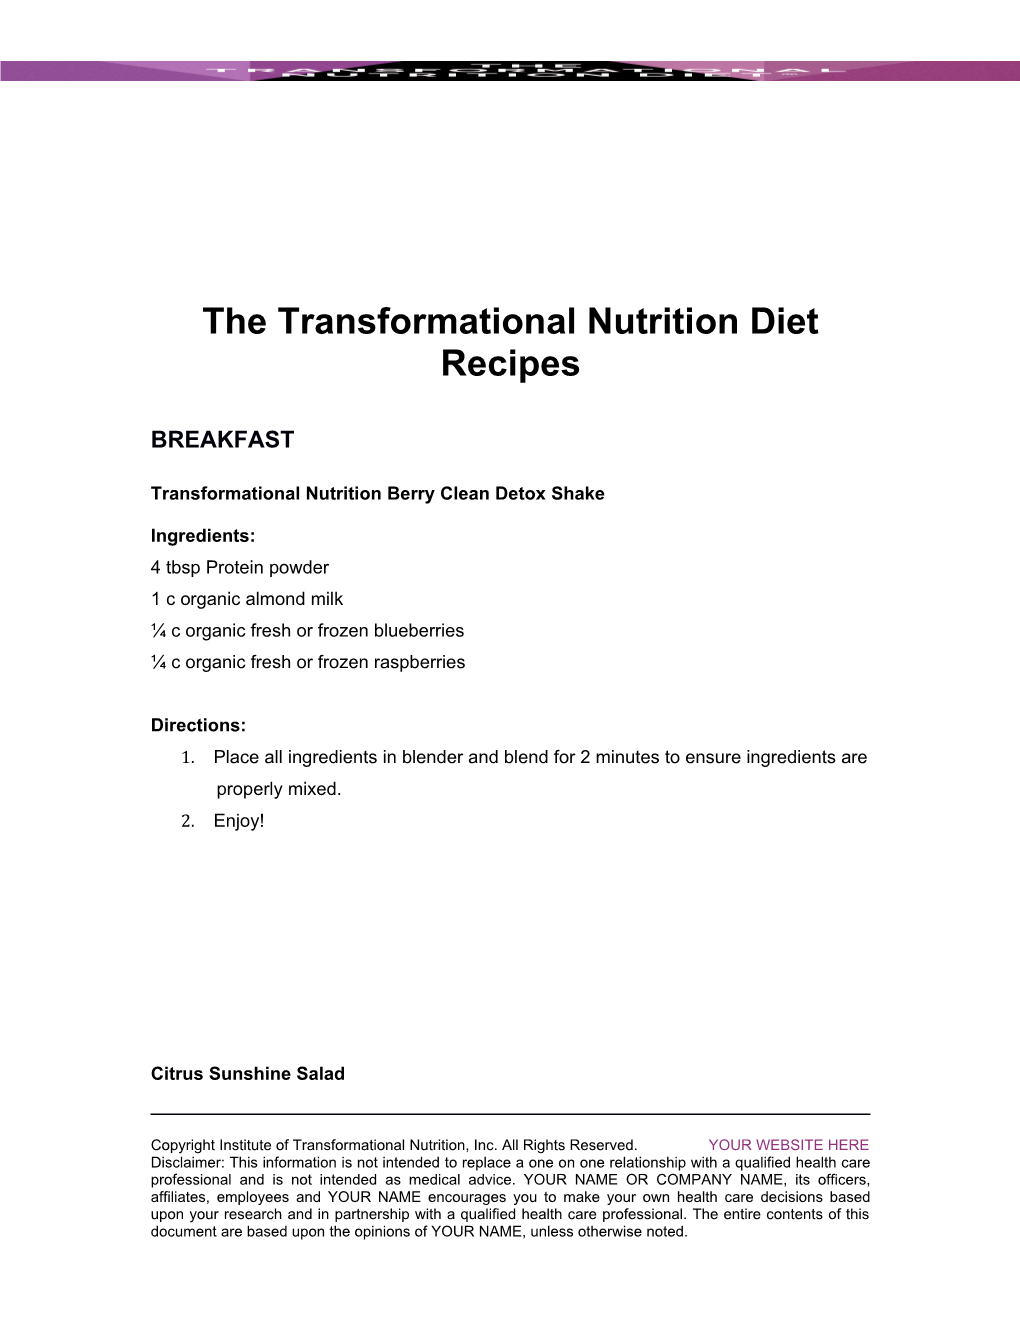 The Transformational Nutrition Diet Recipes